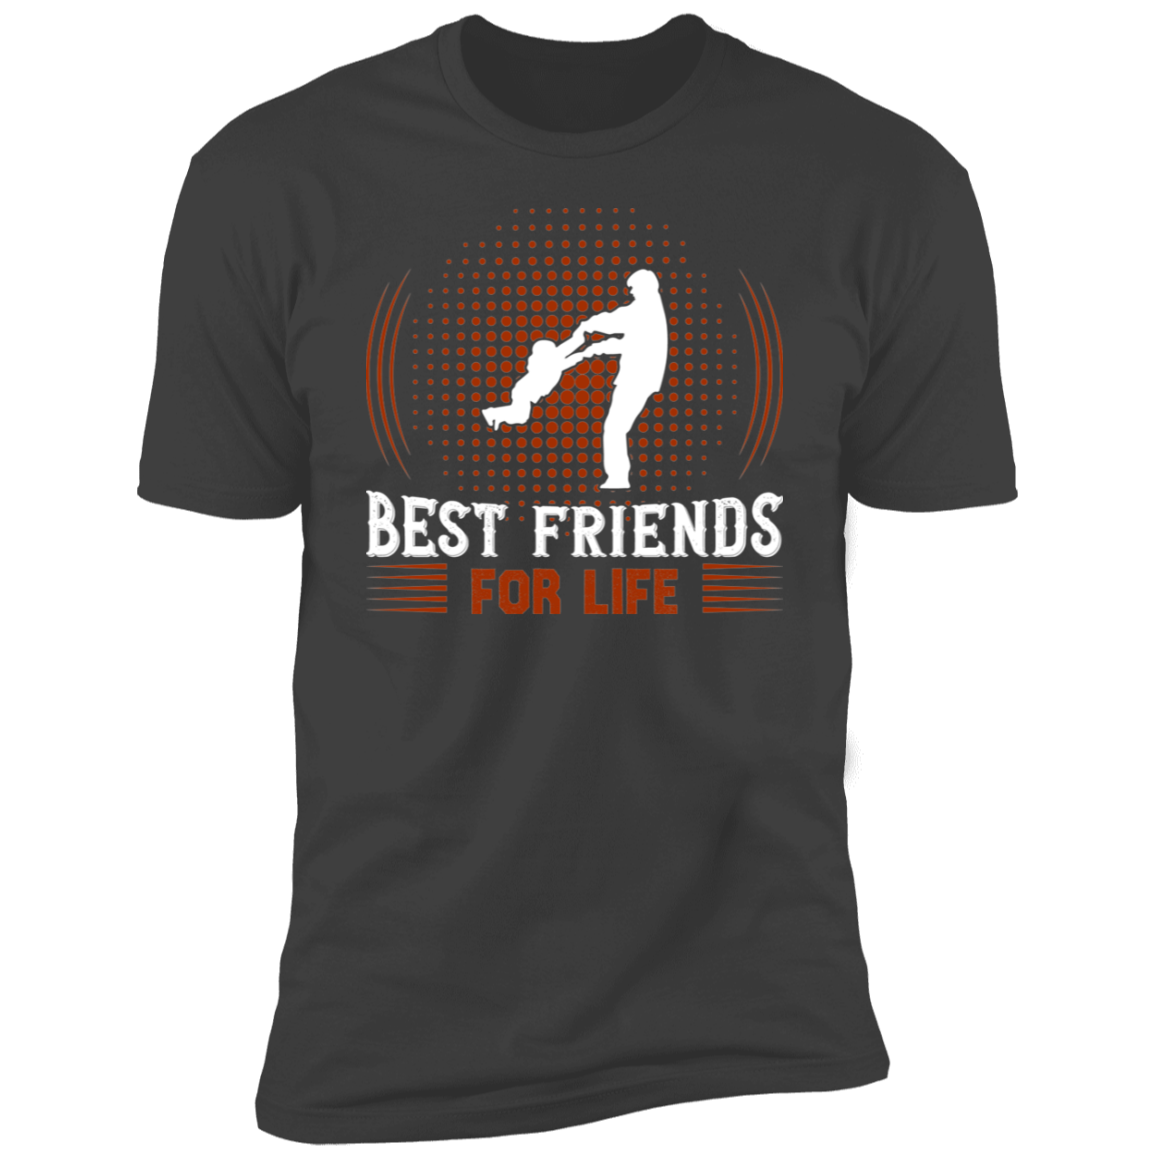 Beds Friends for Life Dad  Short Sleeve T-Shirt